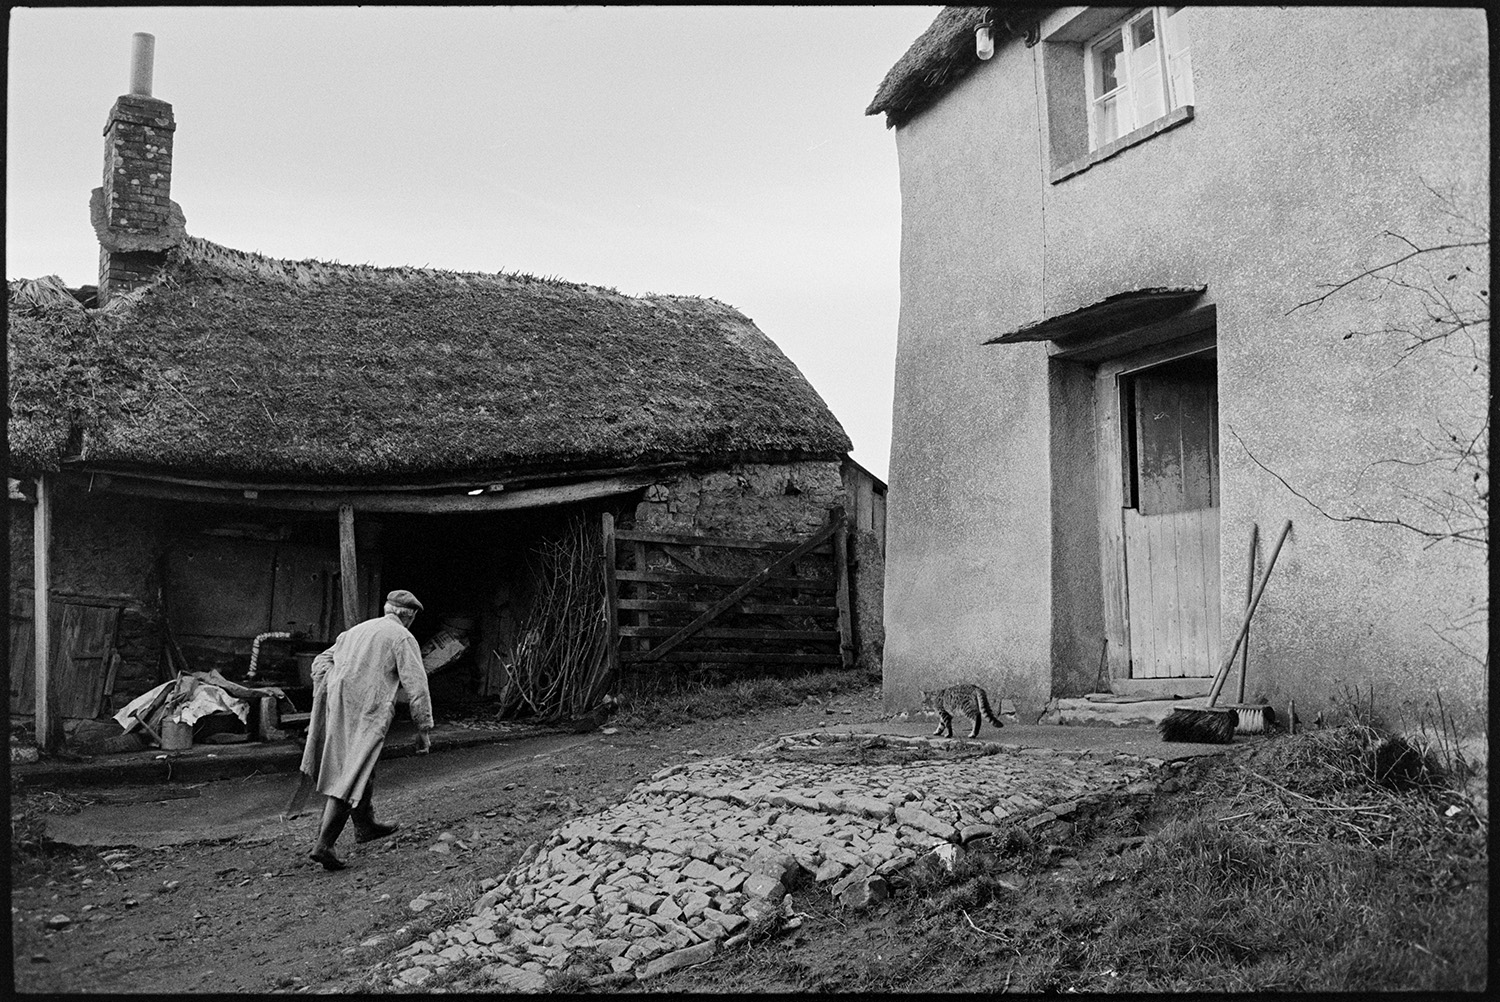 Farmhouse door, cobbled path and thatched barn, cat and farmer. <br />
[Reg Chamings walking through the farmyard at Bridgetown Farm near Iddesleigh. He is walking past a thatched barn and the farmhouse. A cat is walking along cobbles outside the farmhouse, past two brooms propped against the wall.]